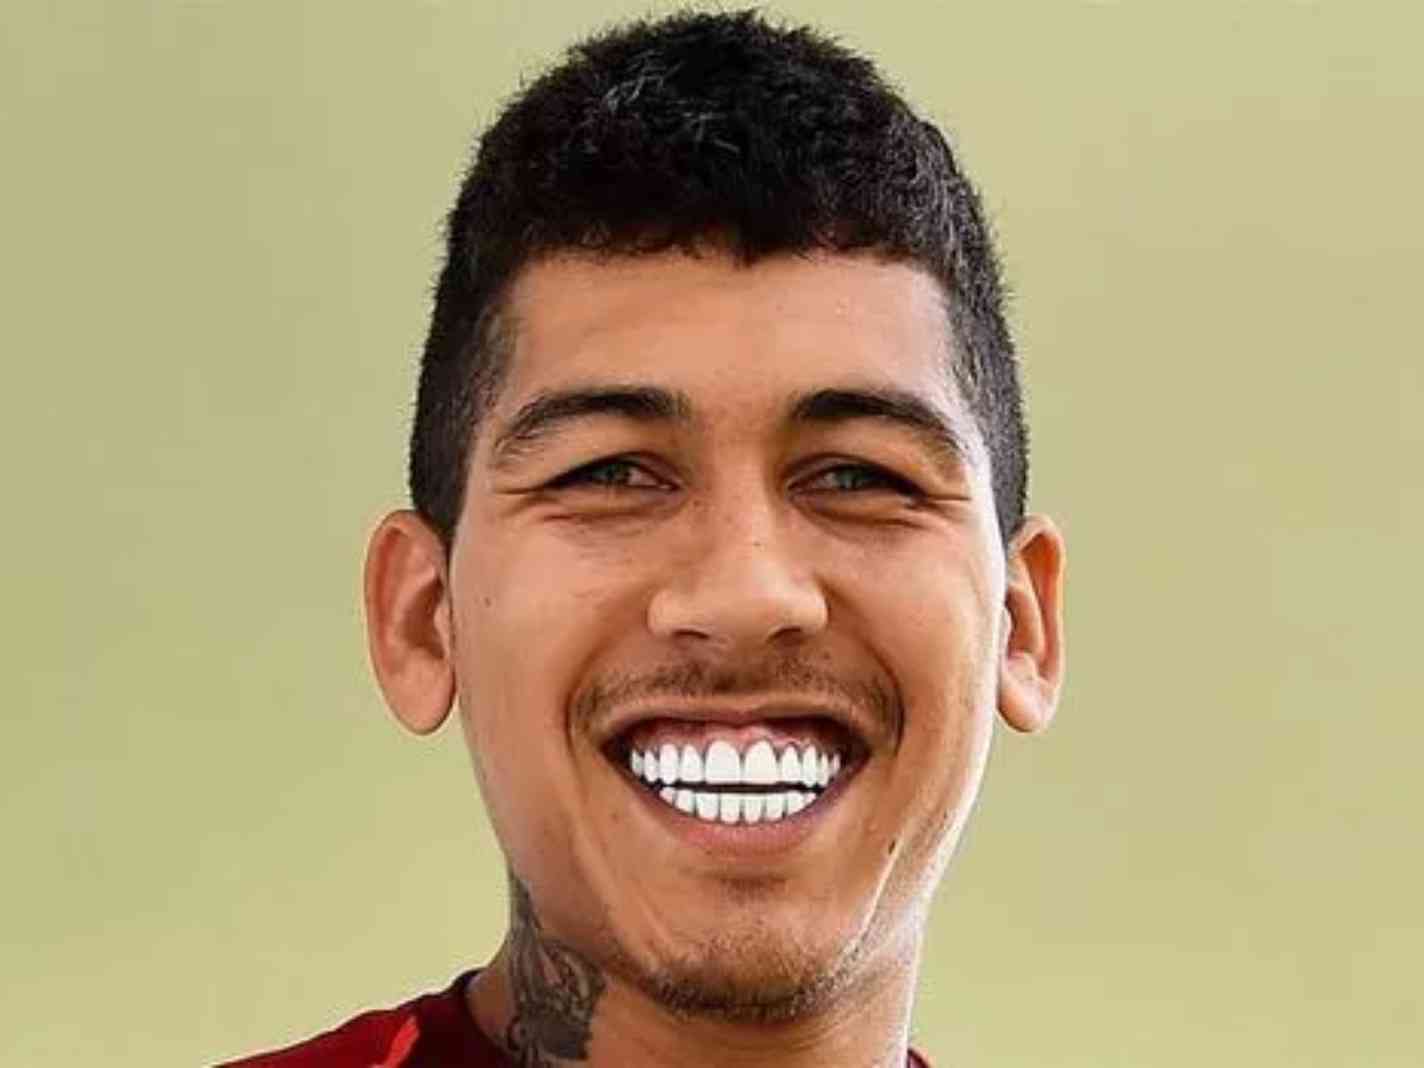 How much did Roberto Firmino spend on teeth whitening?